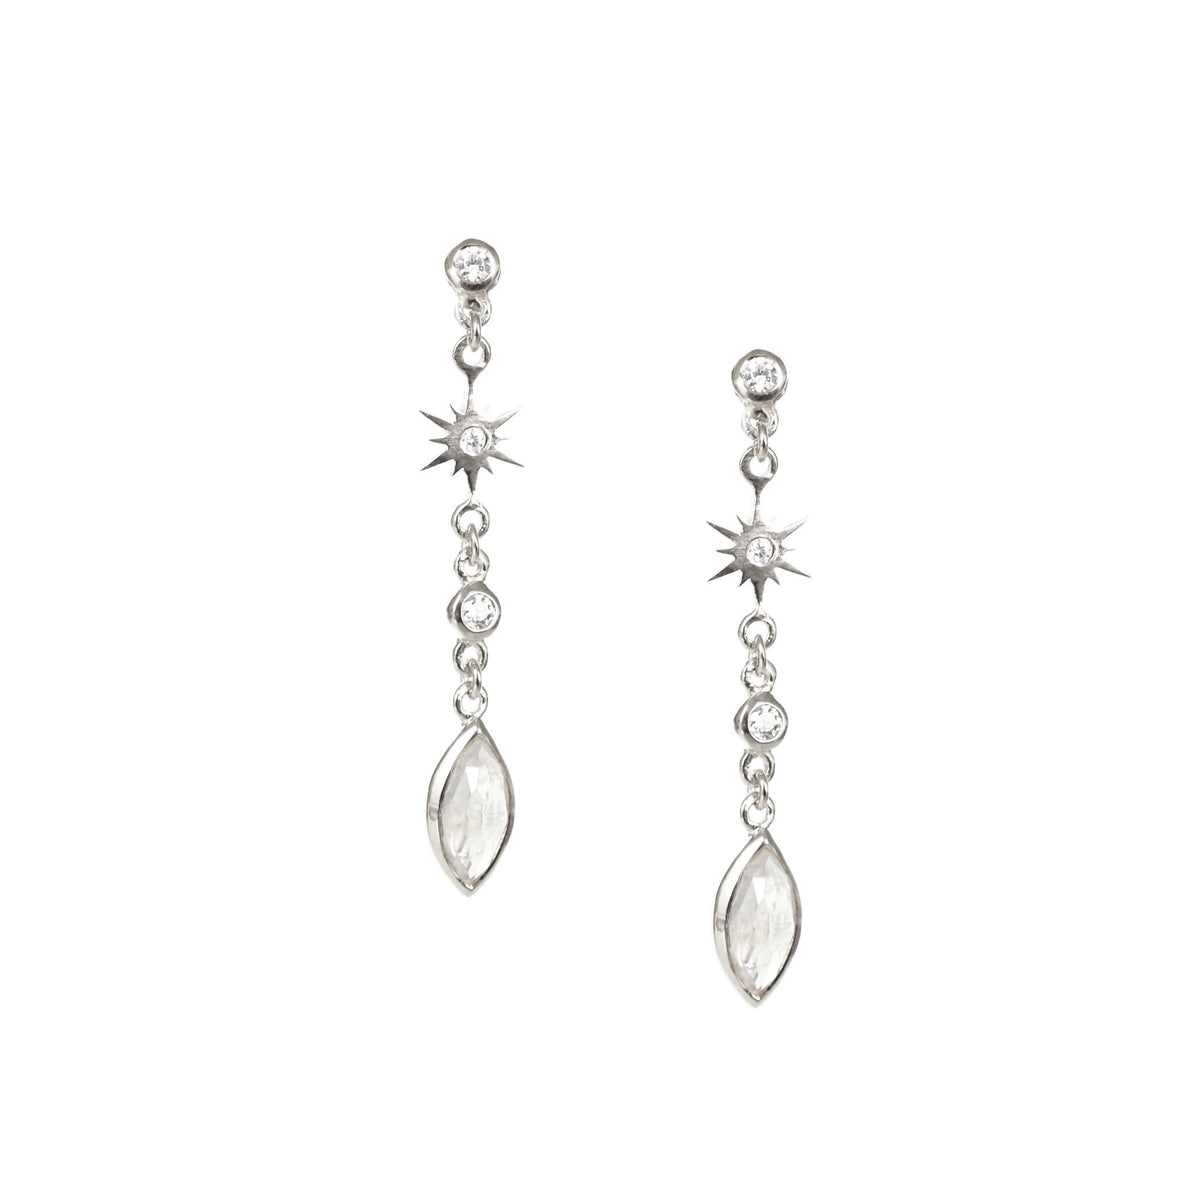 TINY BELIEVE MARQUISE DROP EARRINGS - CUBIC ZIRCONIA, MOONSTONE &amp; SILVER - SO PRETTY CARA COTTER